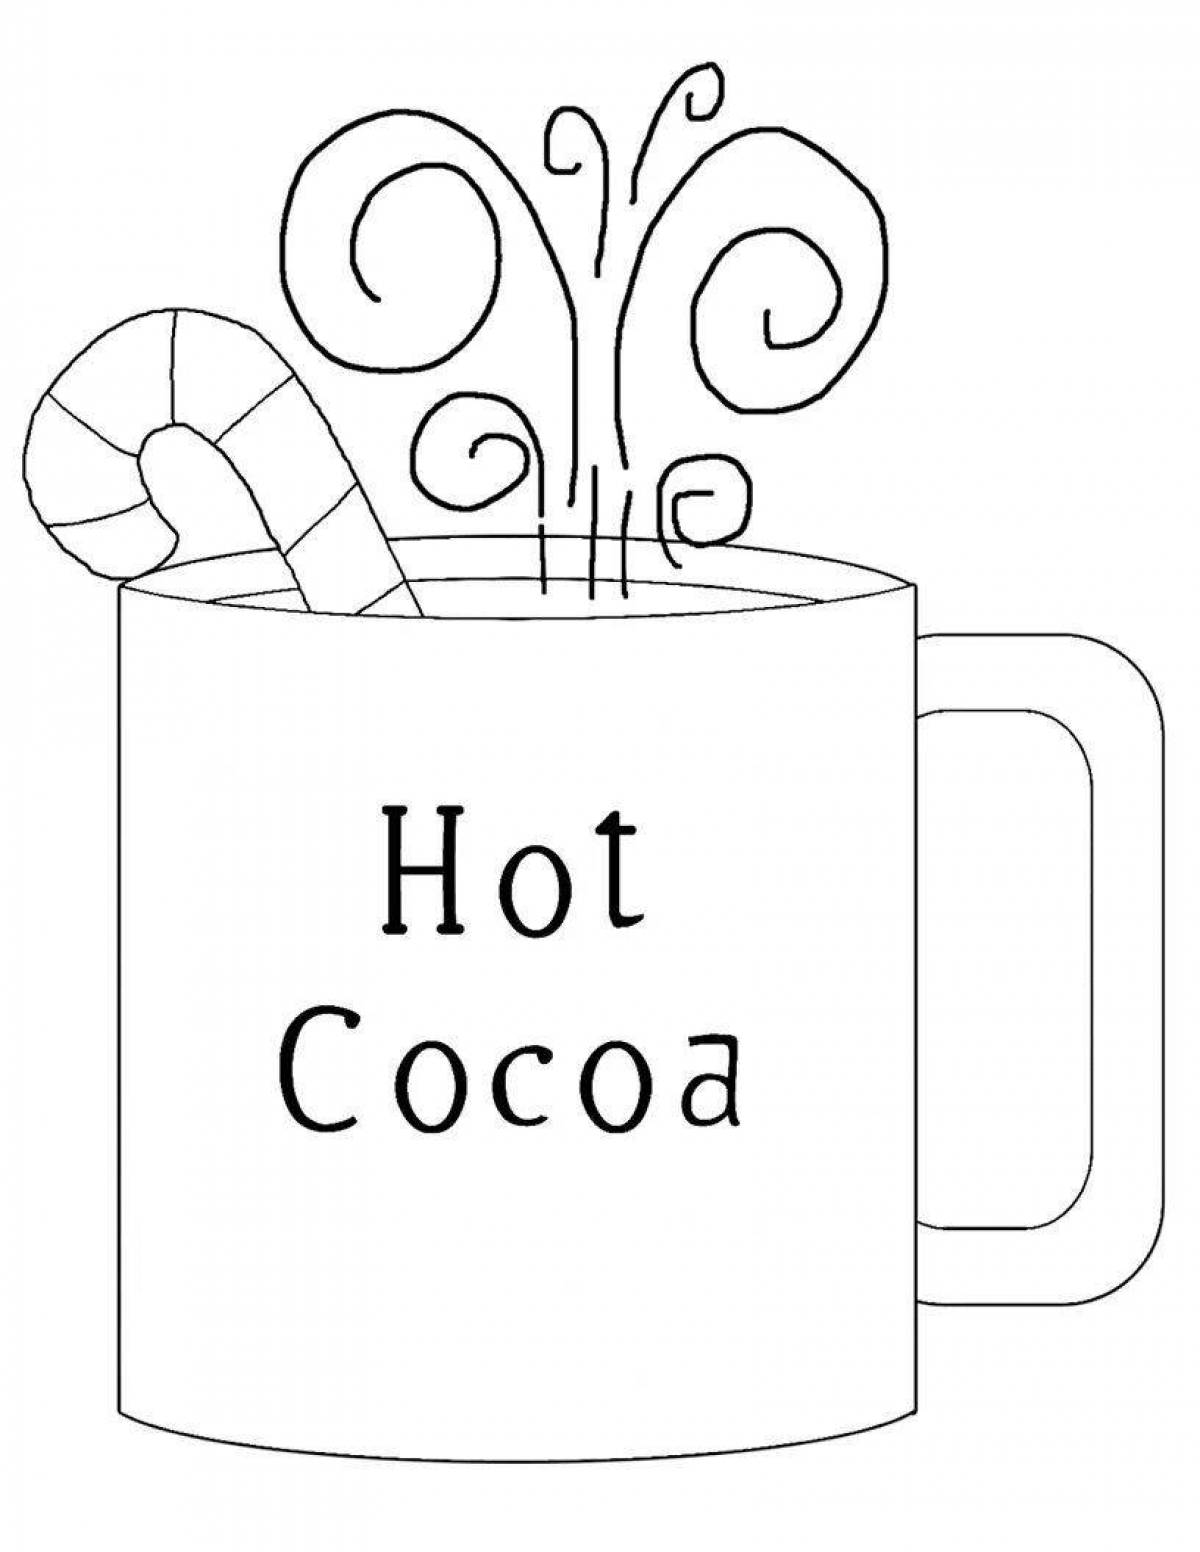 Amazing cocoa coloring page